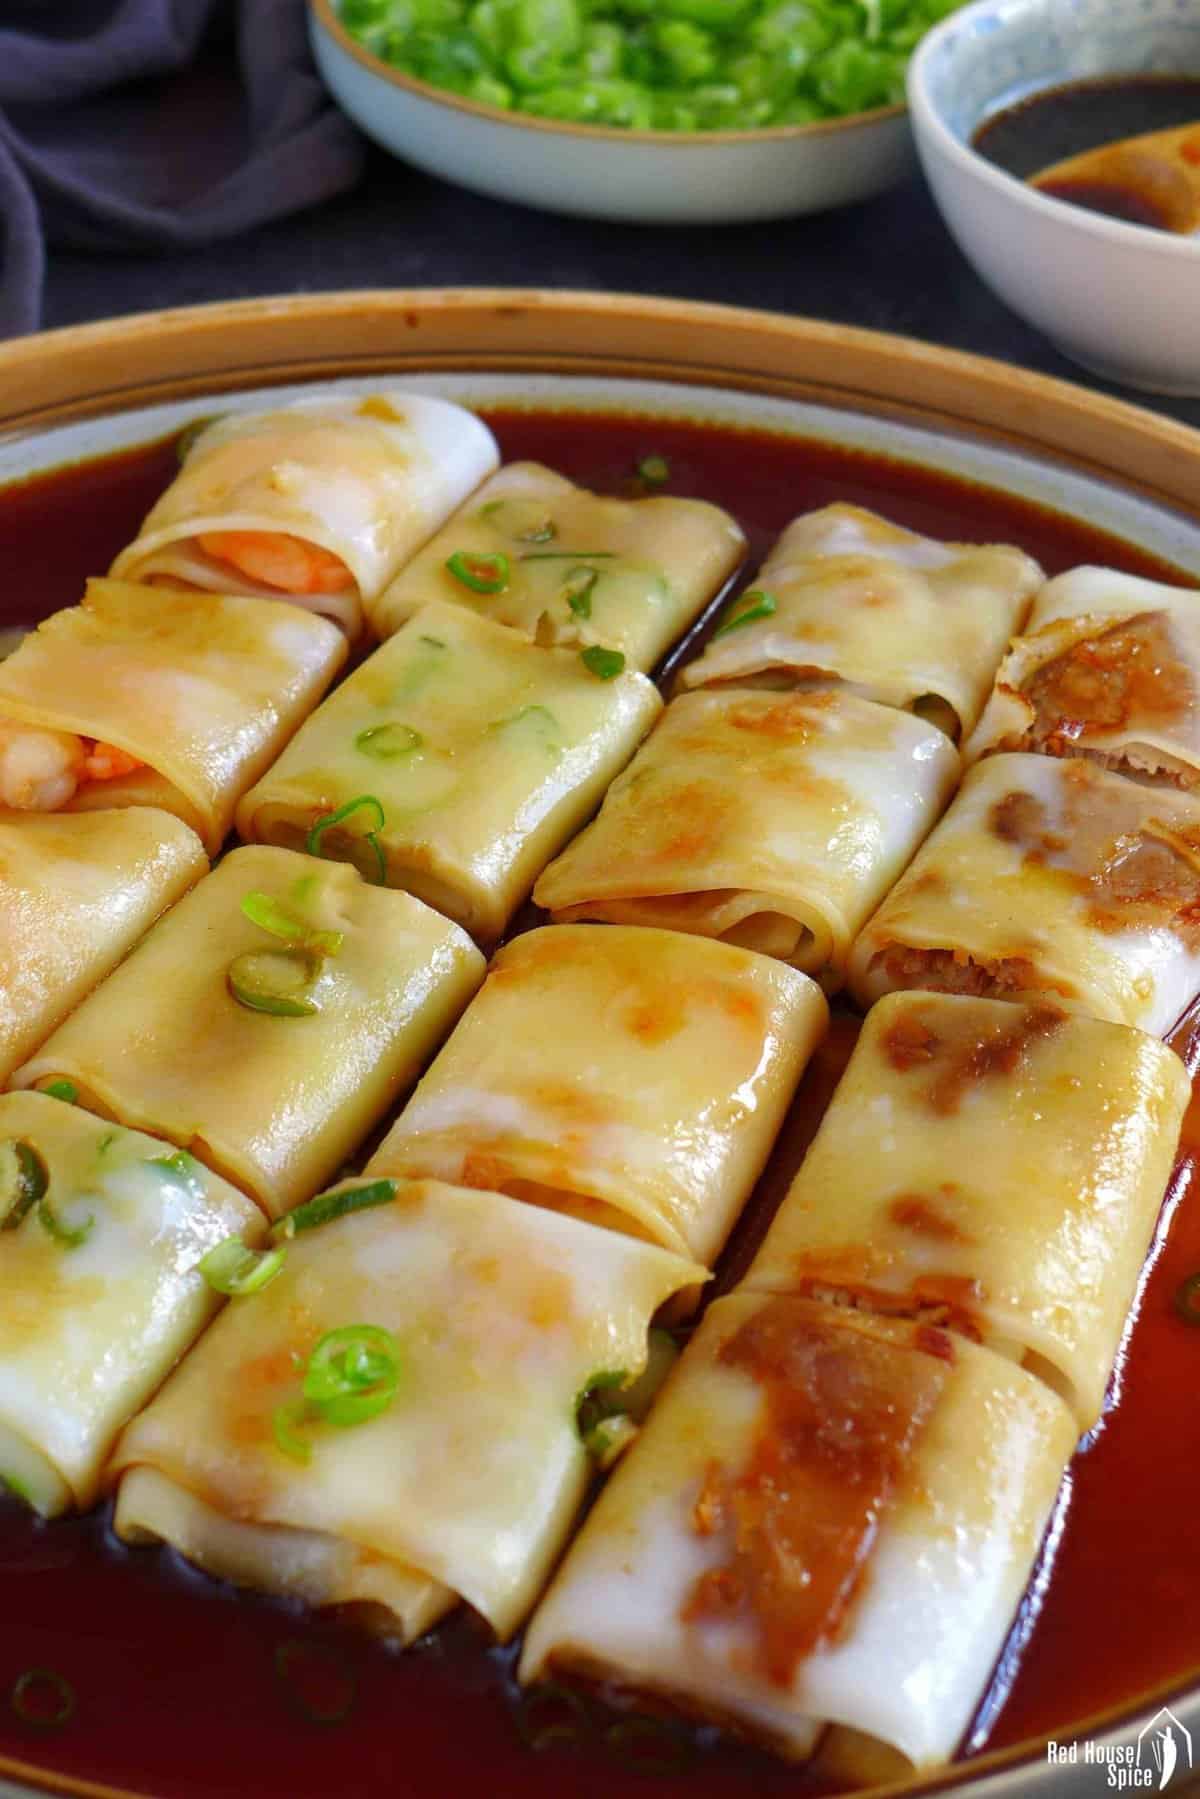 Cheung fun cut into pieces with the sauce